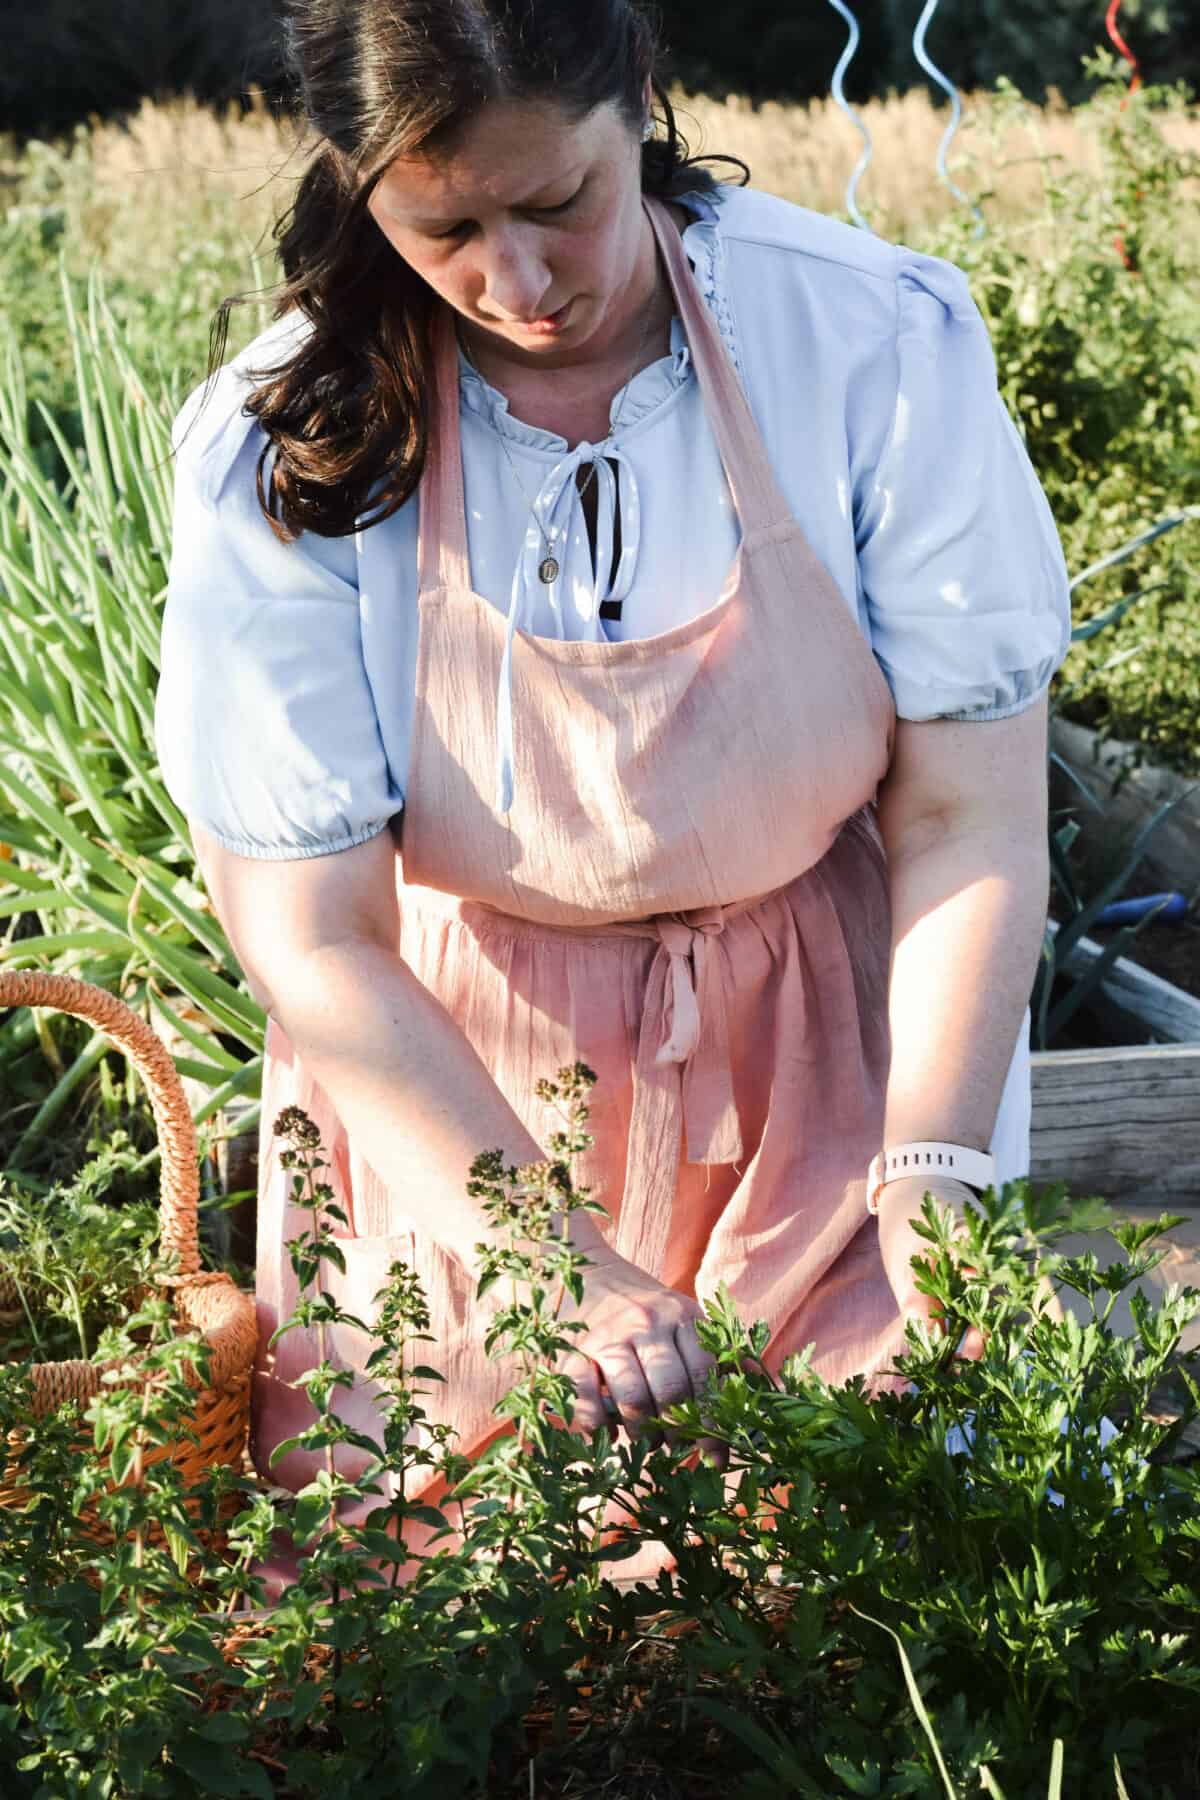 Mary cutting herbs in raised beds.